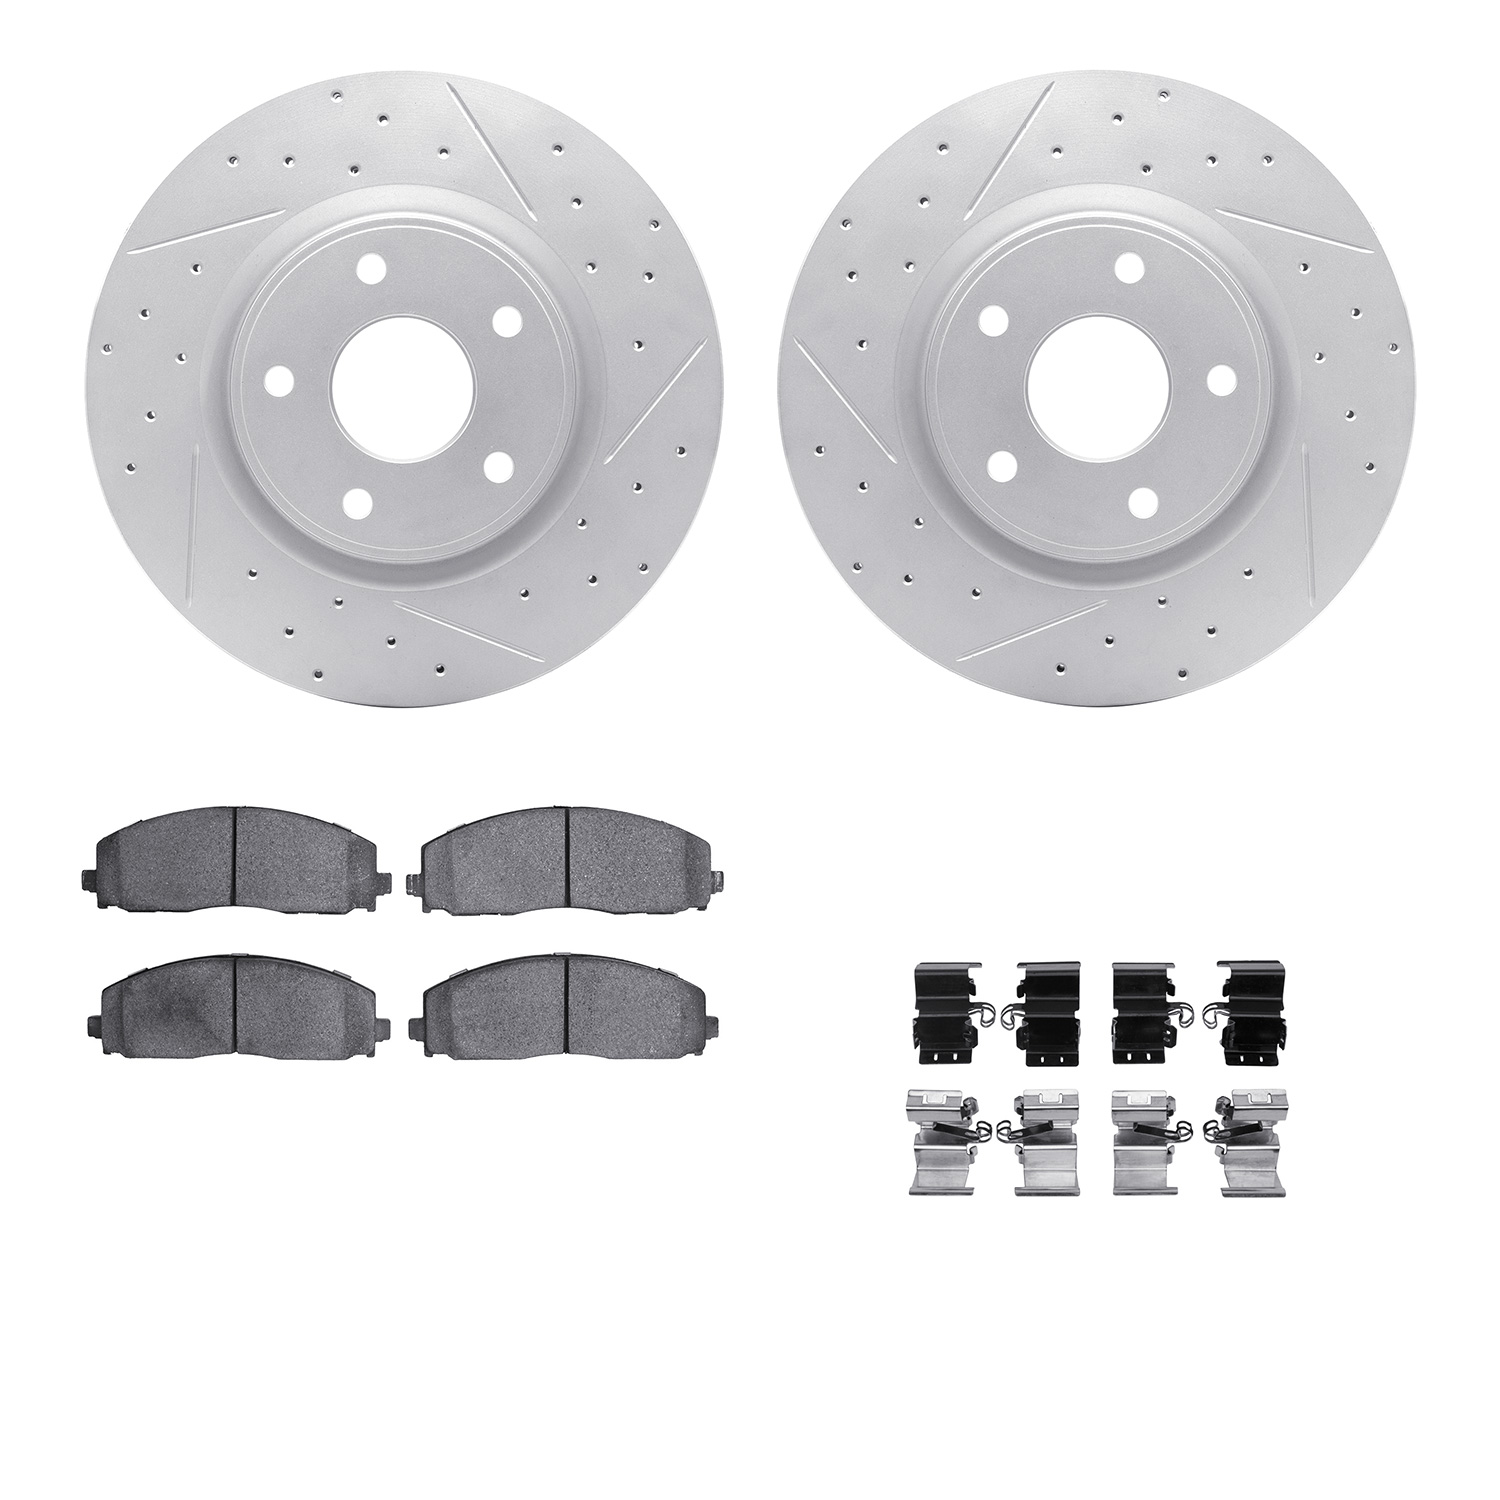 2512-40093 Geoperformance Drilled/Slotted Rotors w/5000 Advanced Brake Pads Kit & Hardware, Fits Select Multiple Makes/Models, P